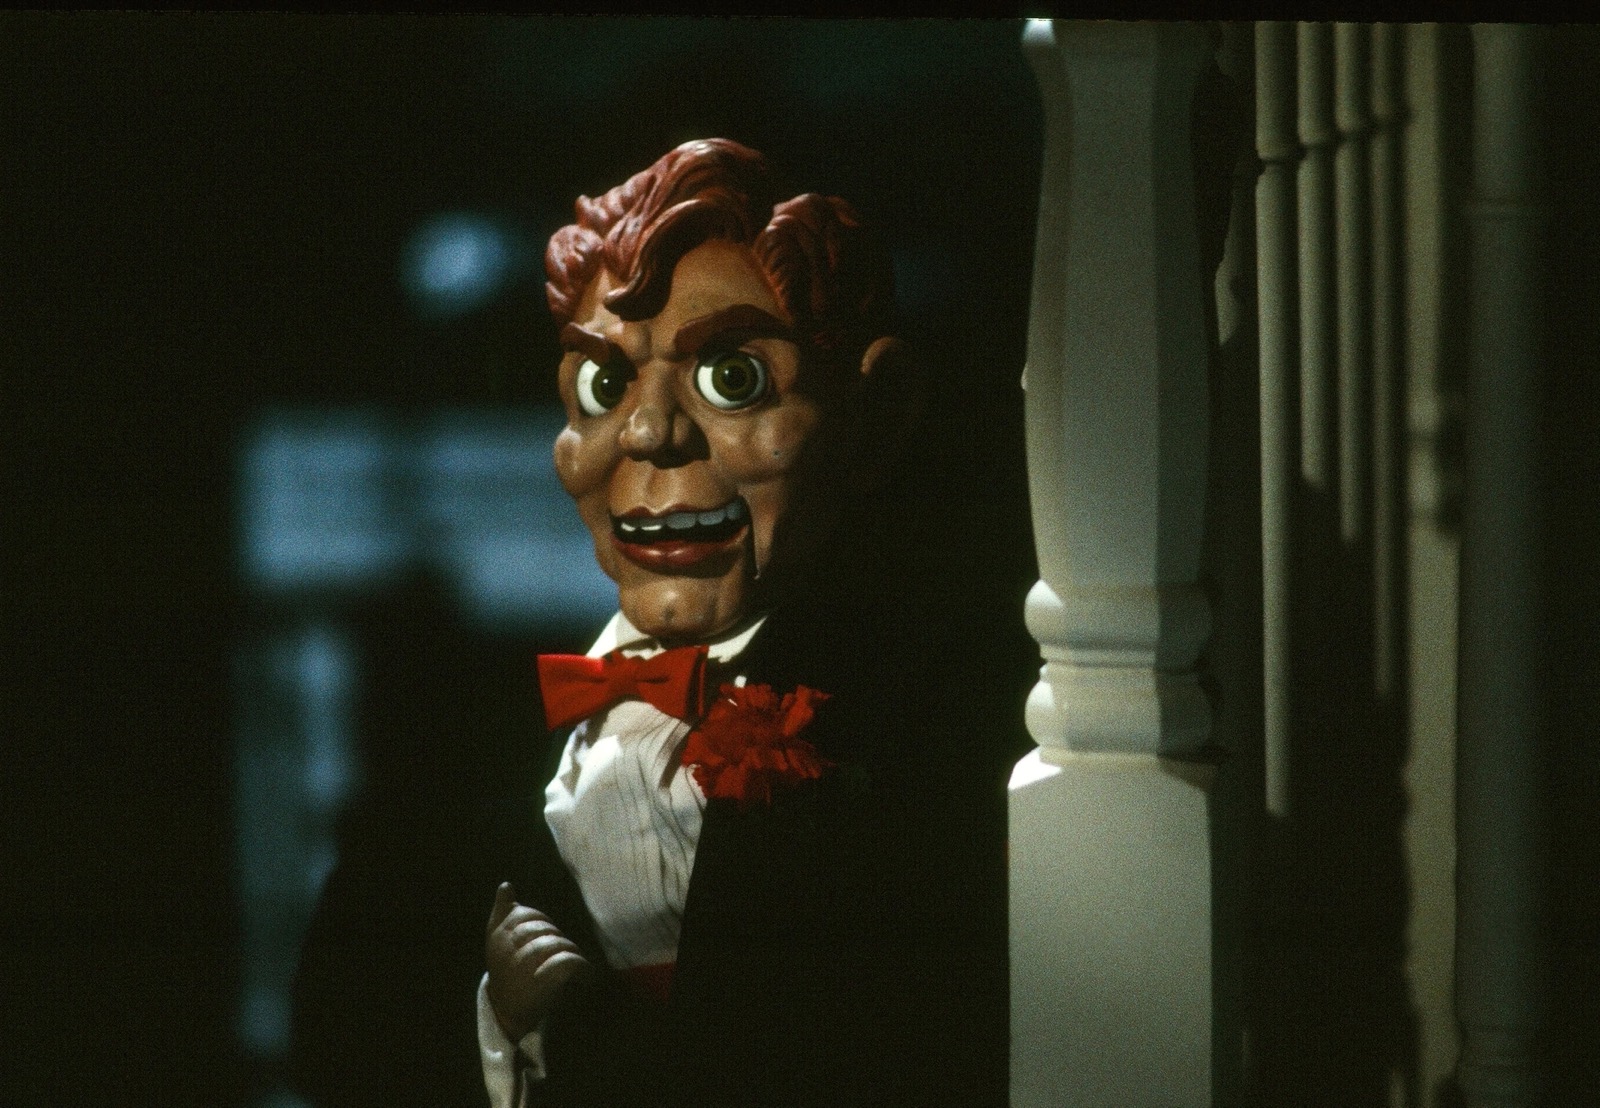 Do You Remember These TV Shows That Aired in the ’90s? Goosebumps ventriloquist dummy puppet